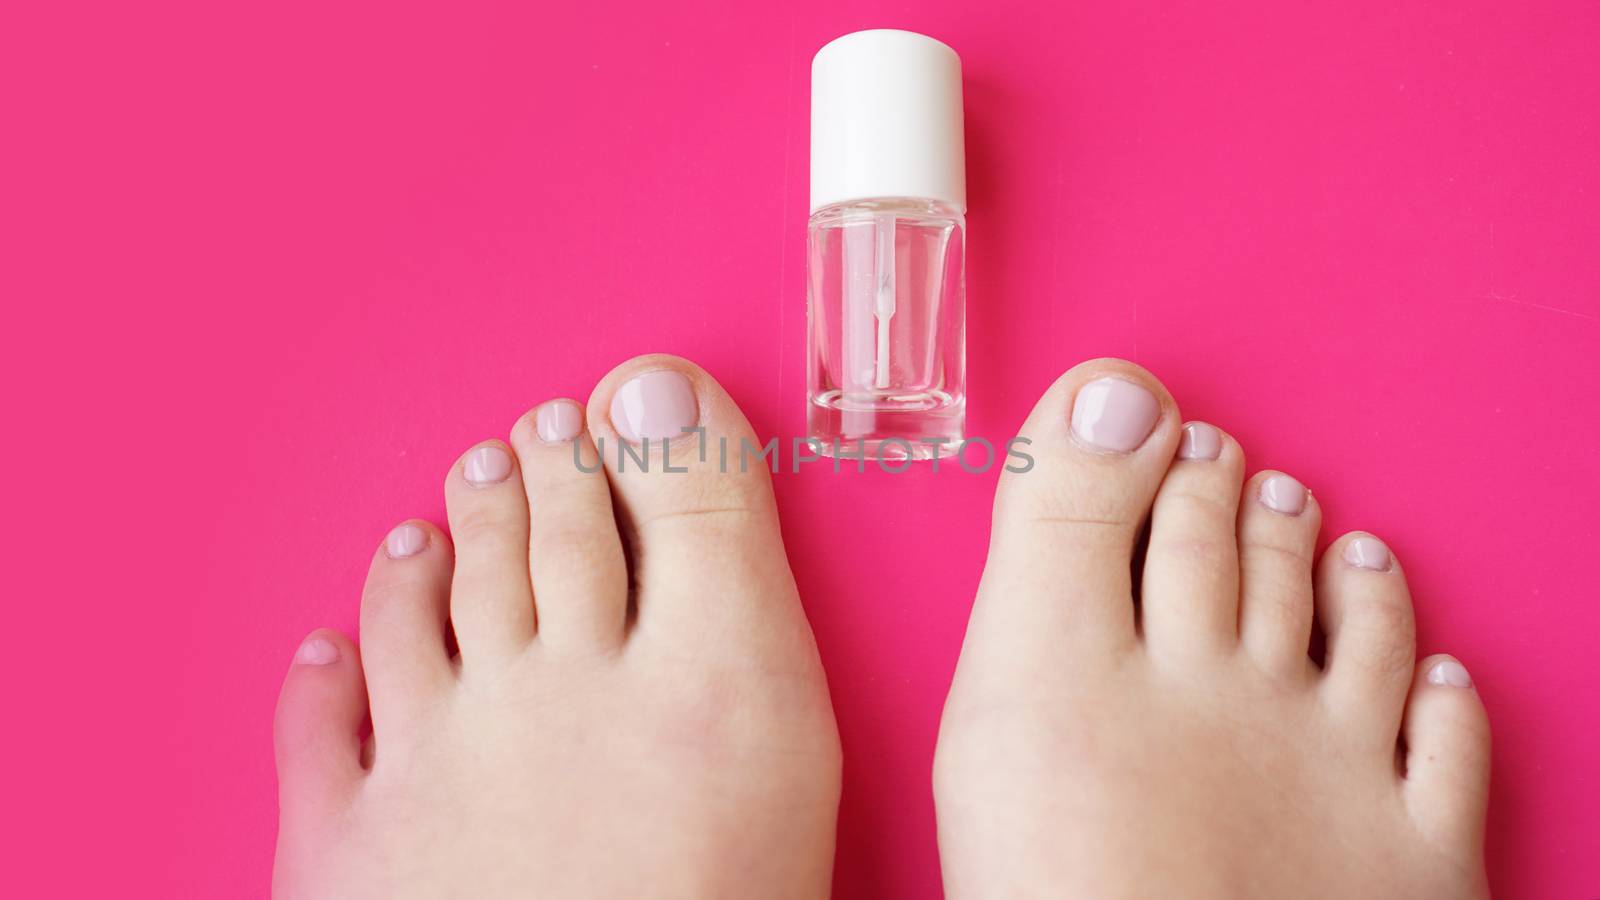 Pedicure with transparent nail polish on pink background by natali_brill